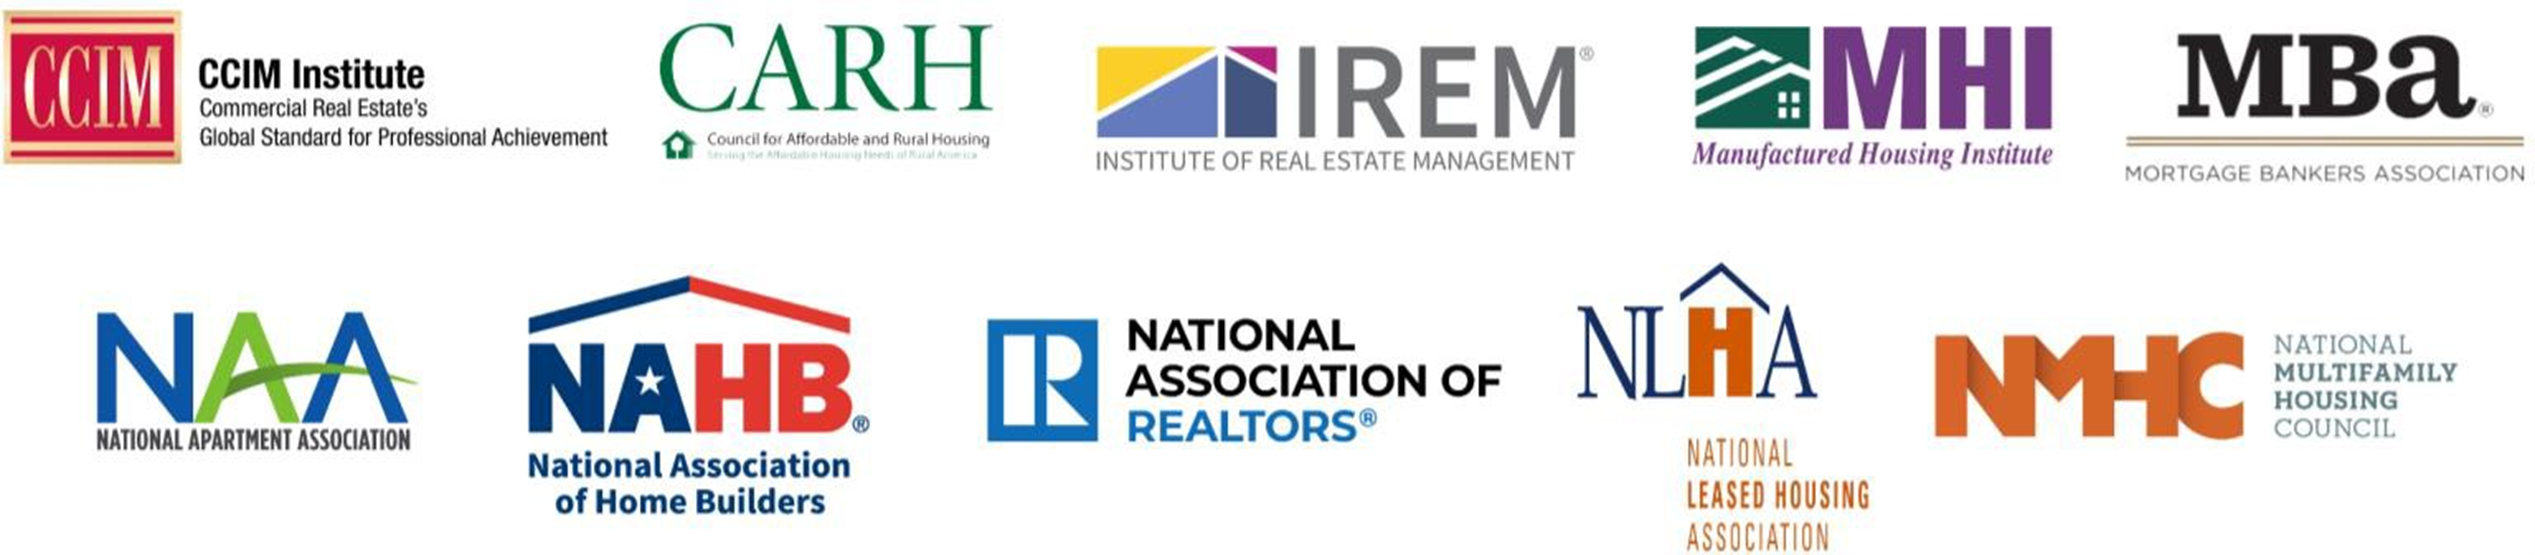 CCIM Insitute, CARH, IREM, MHI, MBA, NAA, NAHB, National Association of Relators, NLHA, NMHC